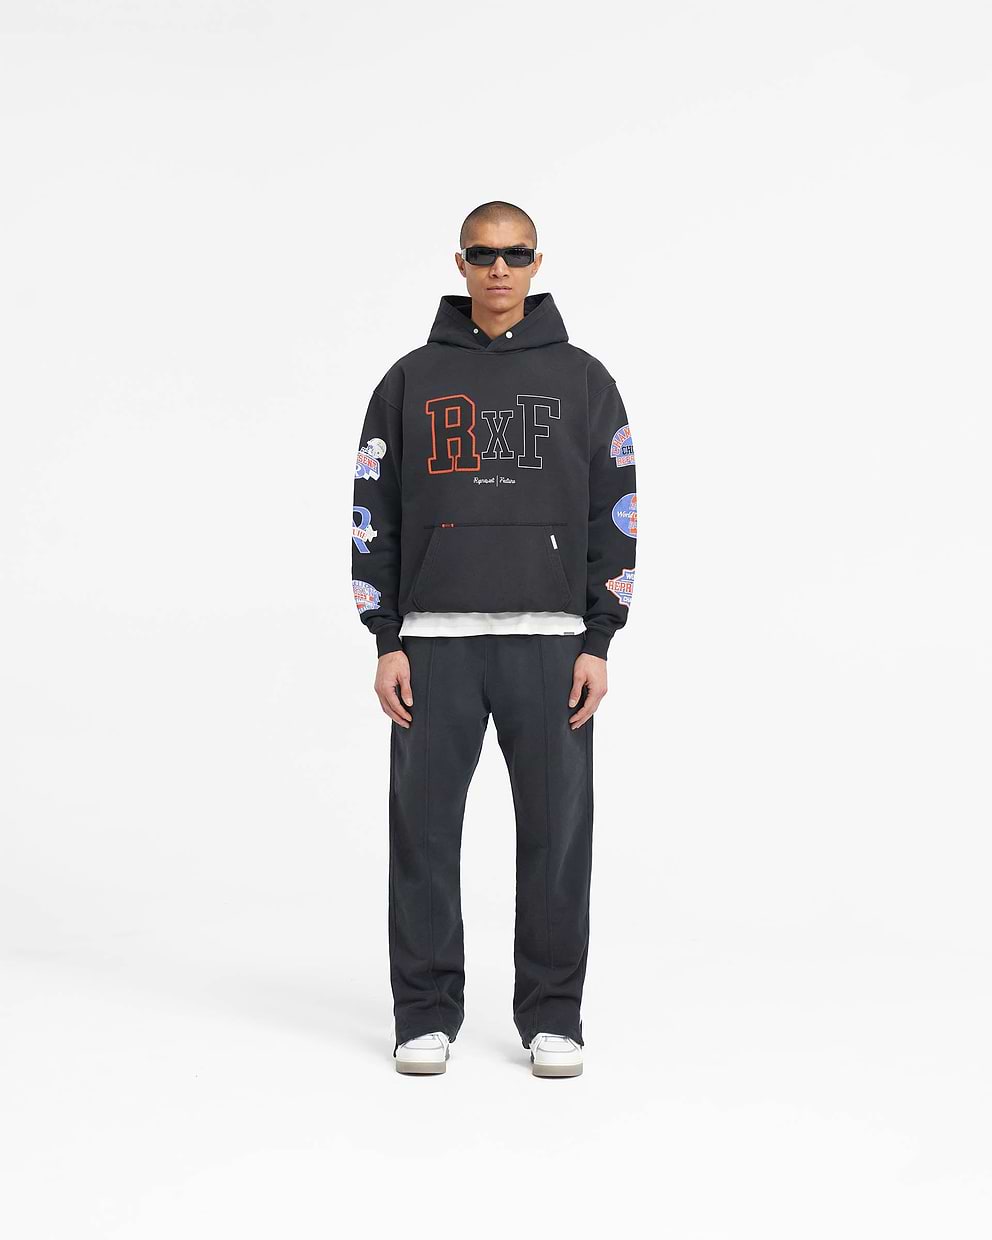 Represent X Feature Champions Hoodie - Stained Black